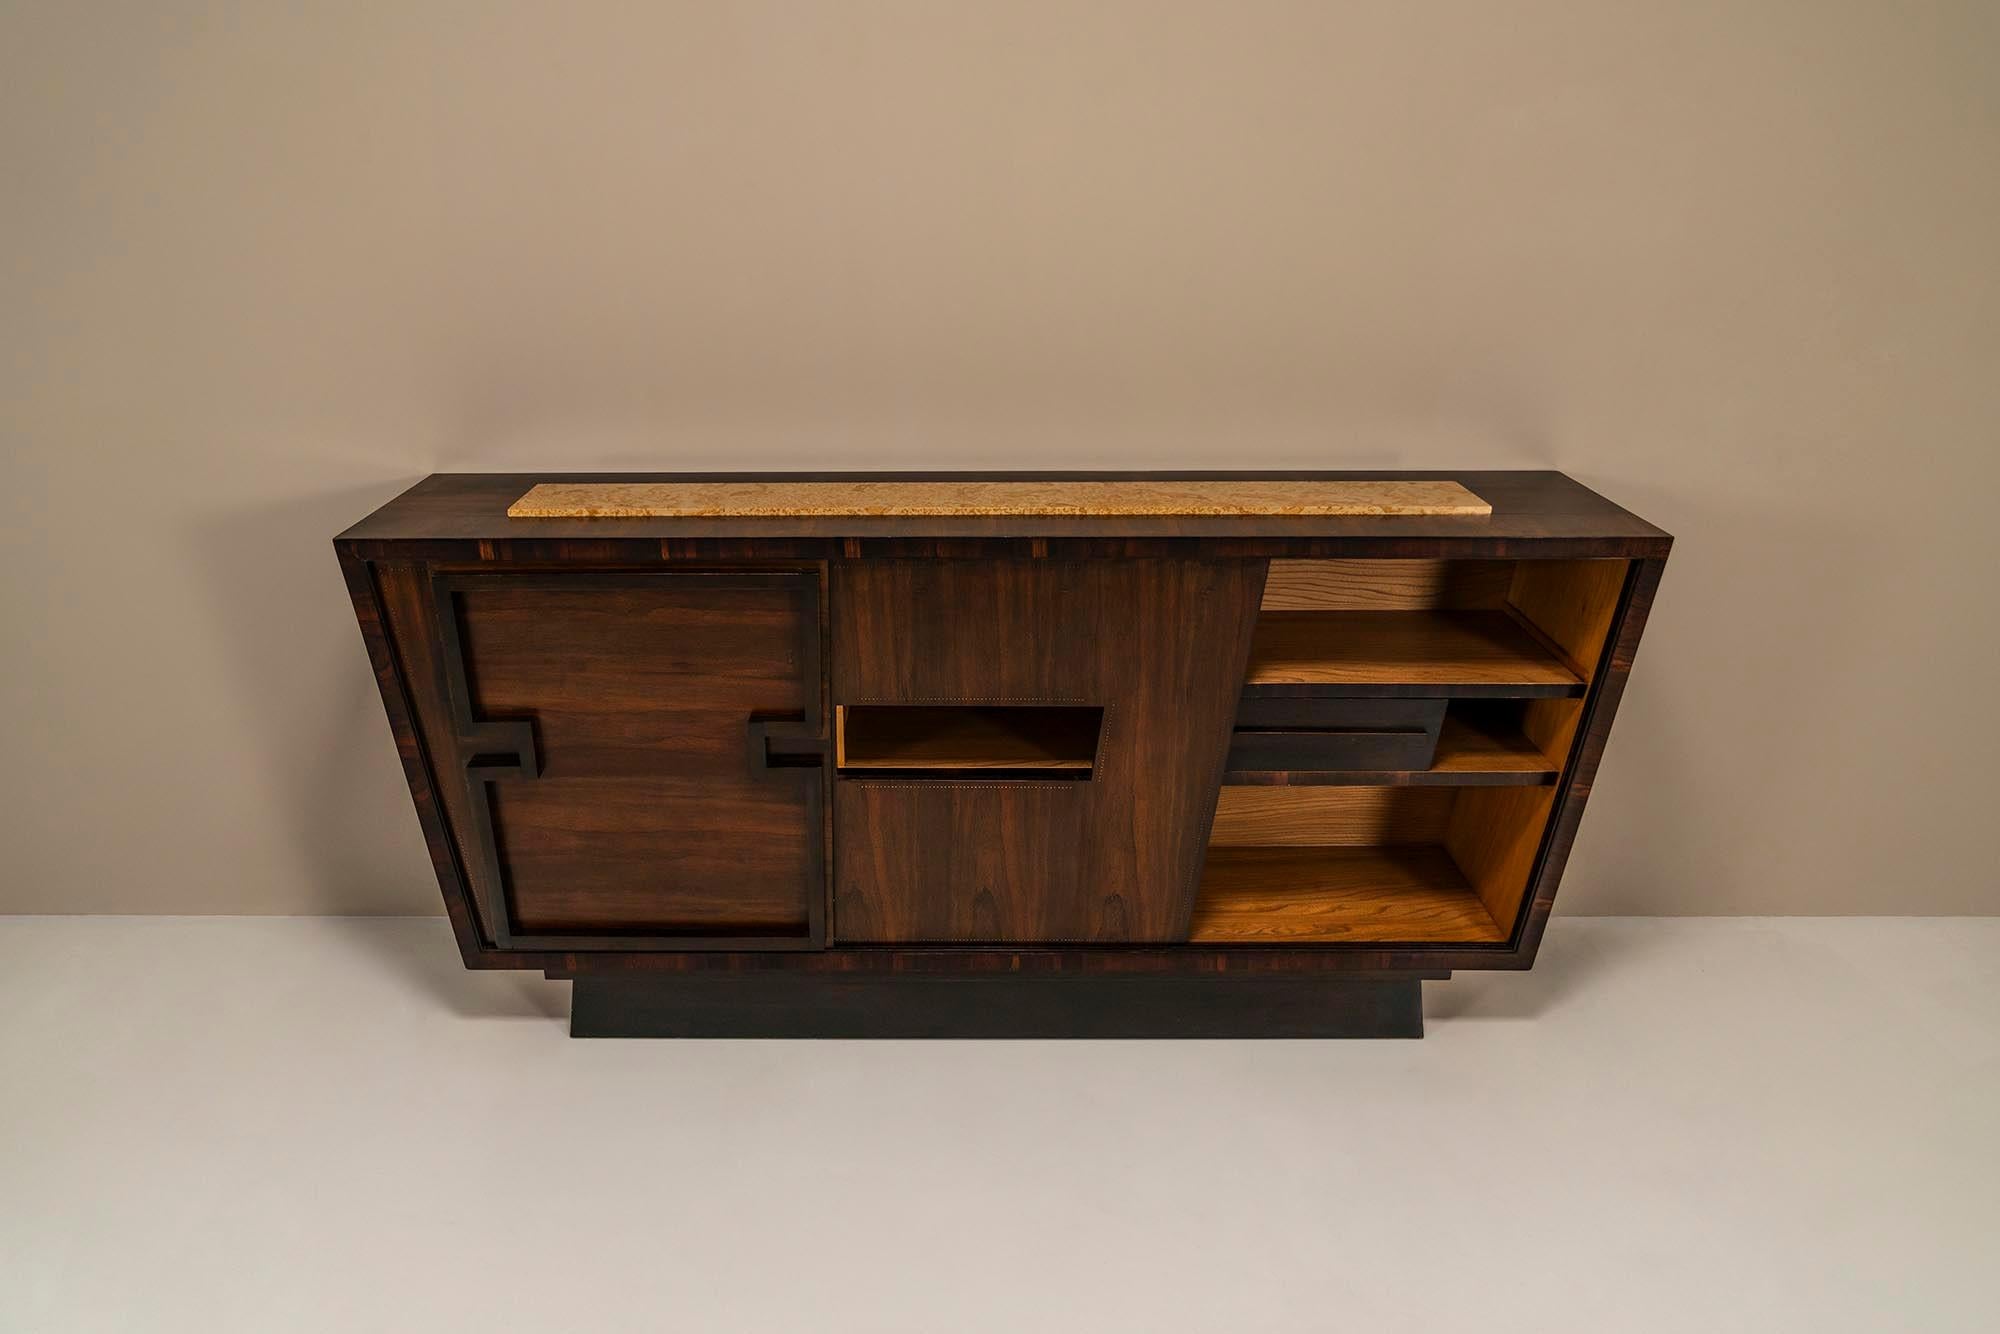 Modernist Sideboard In Studded Rosewood By Andre Sornay, France 1940s For Sale 4